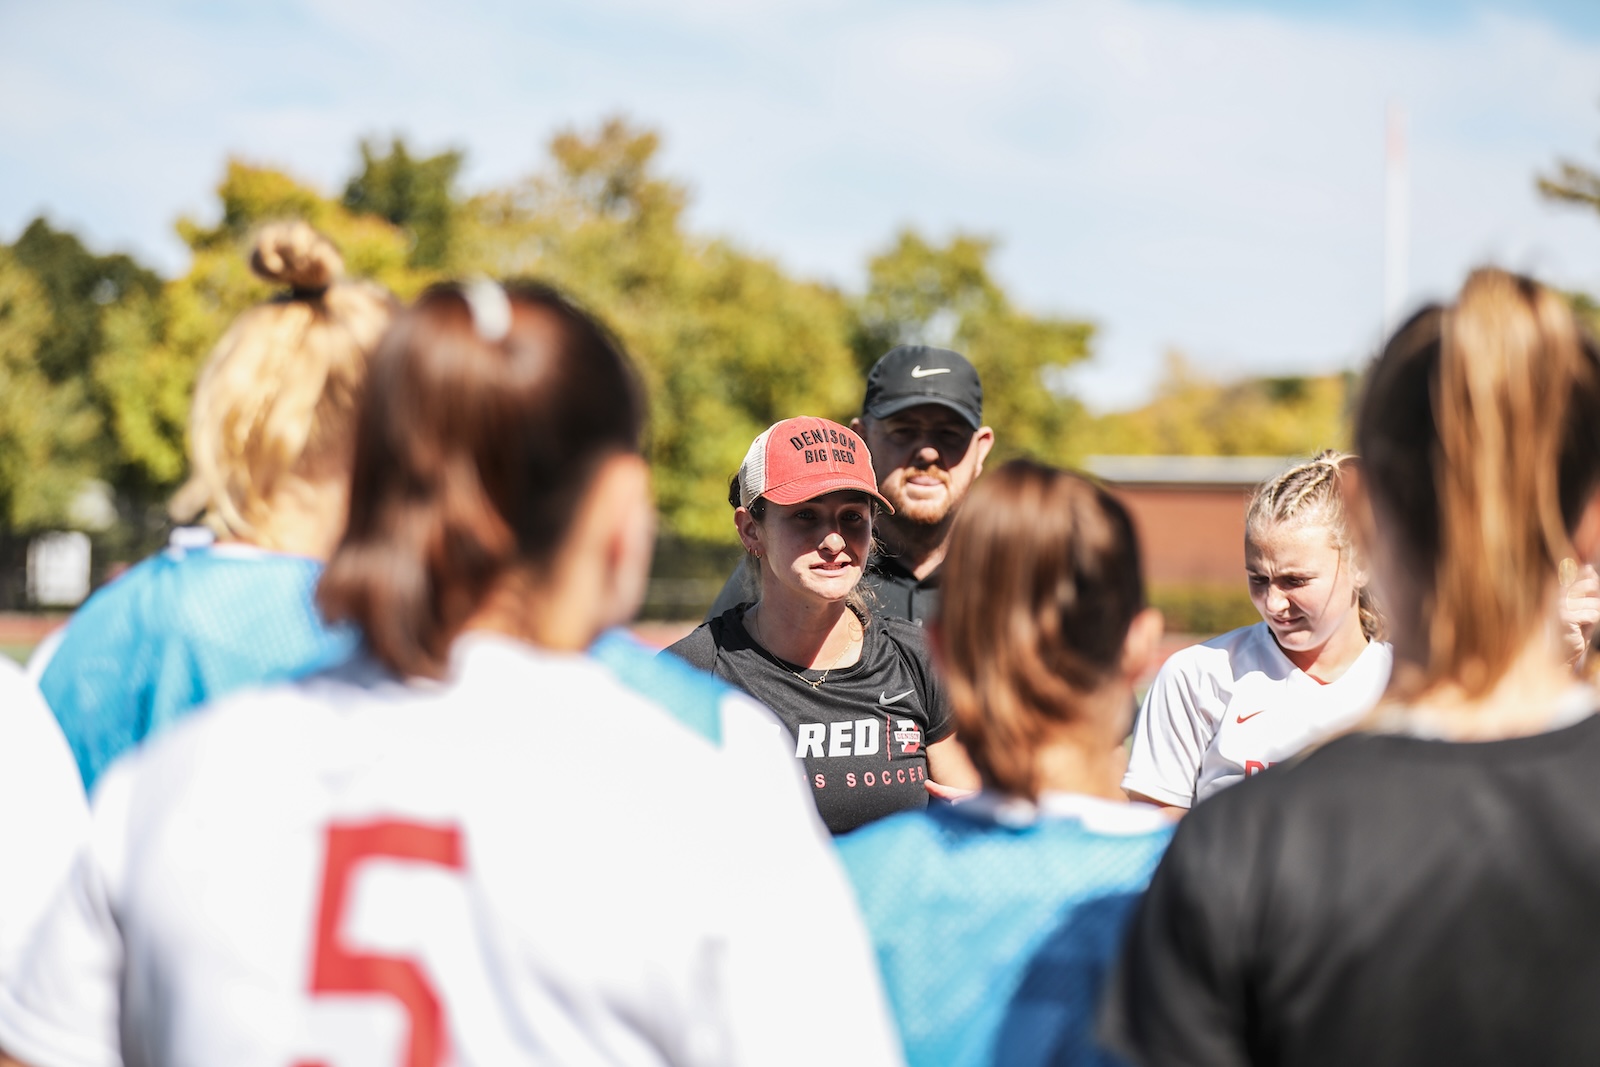 Sarah Brink led the women’s soccer team to an NCAC tournament title in her first year at the helm. (Lilly Rennie)